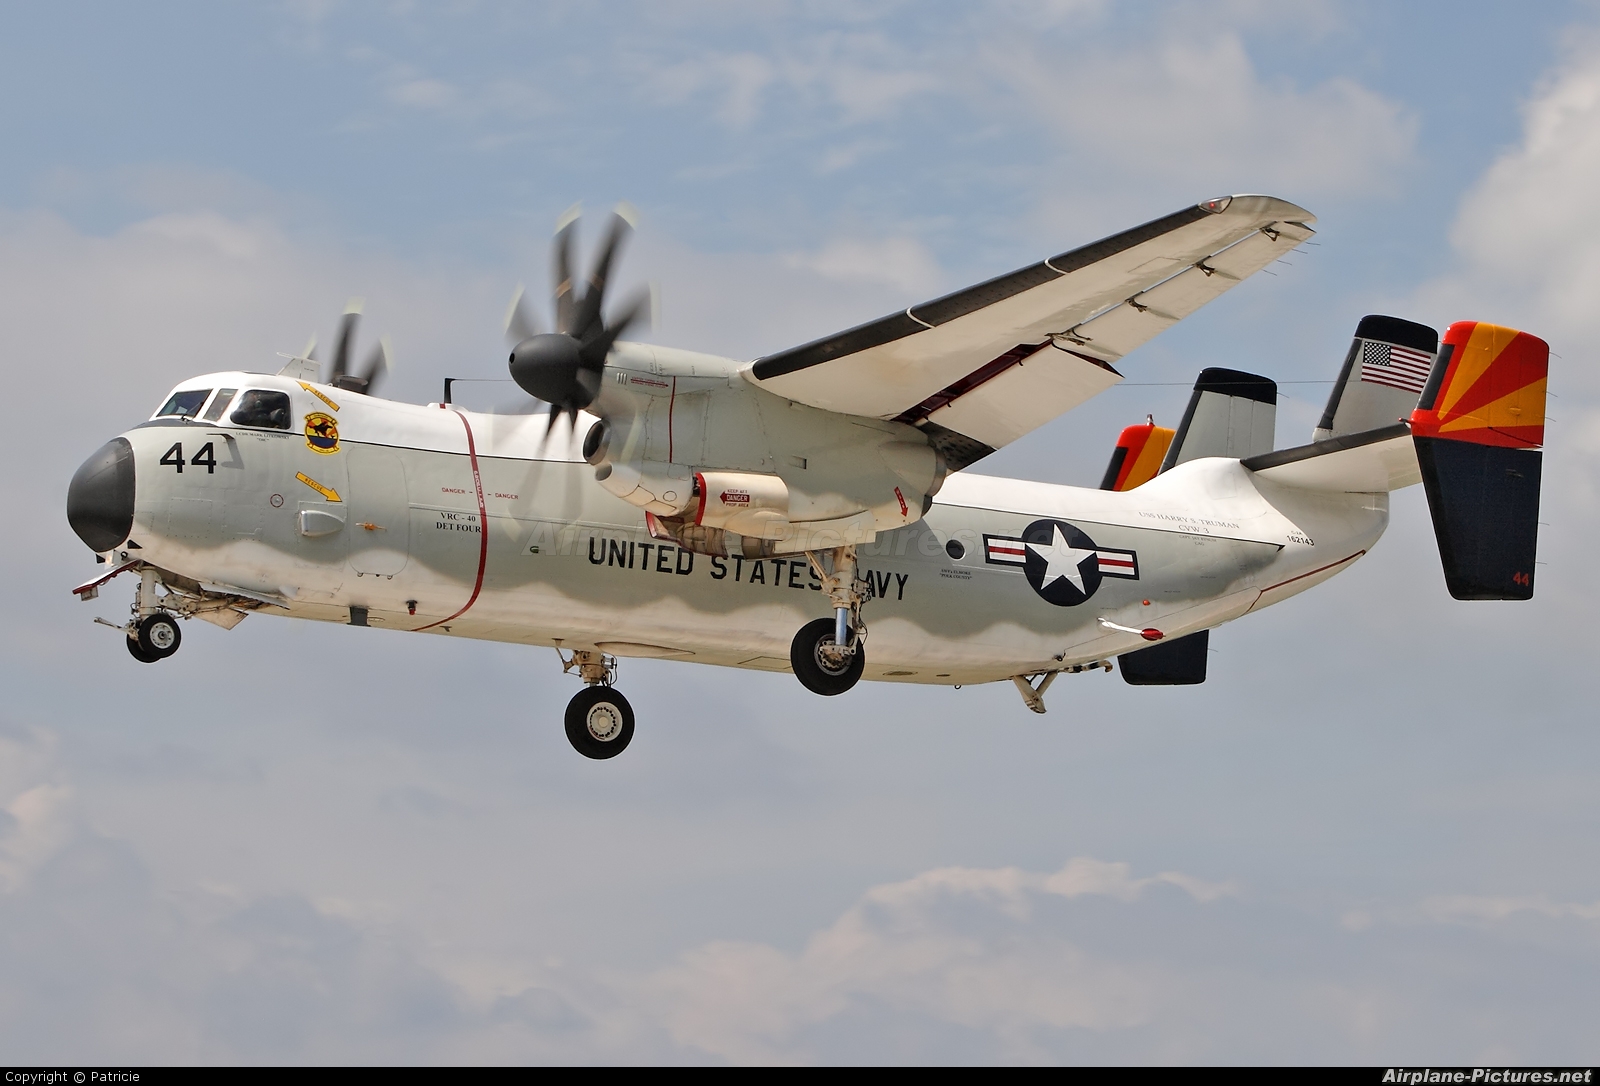 Grumman C-2 Greyhound Backgrounds, Compatible - PC, Mobile, Gadgets| 1600x1086 px